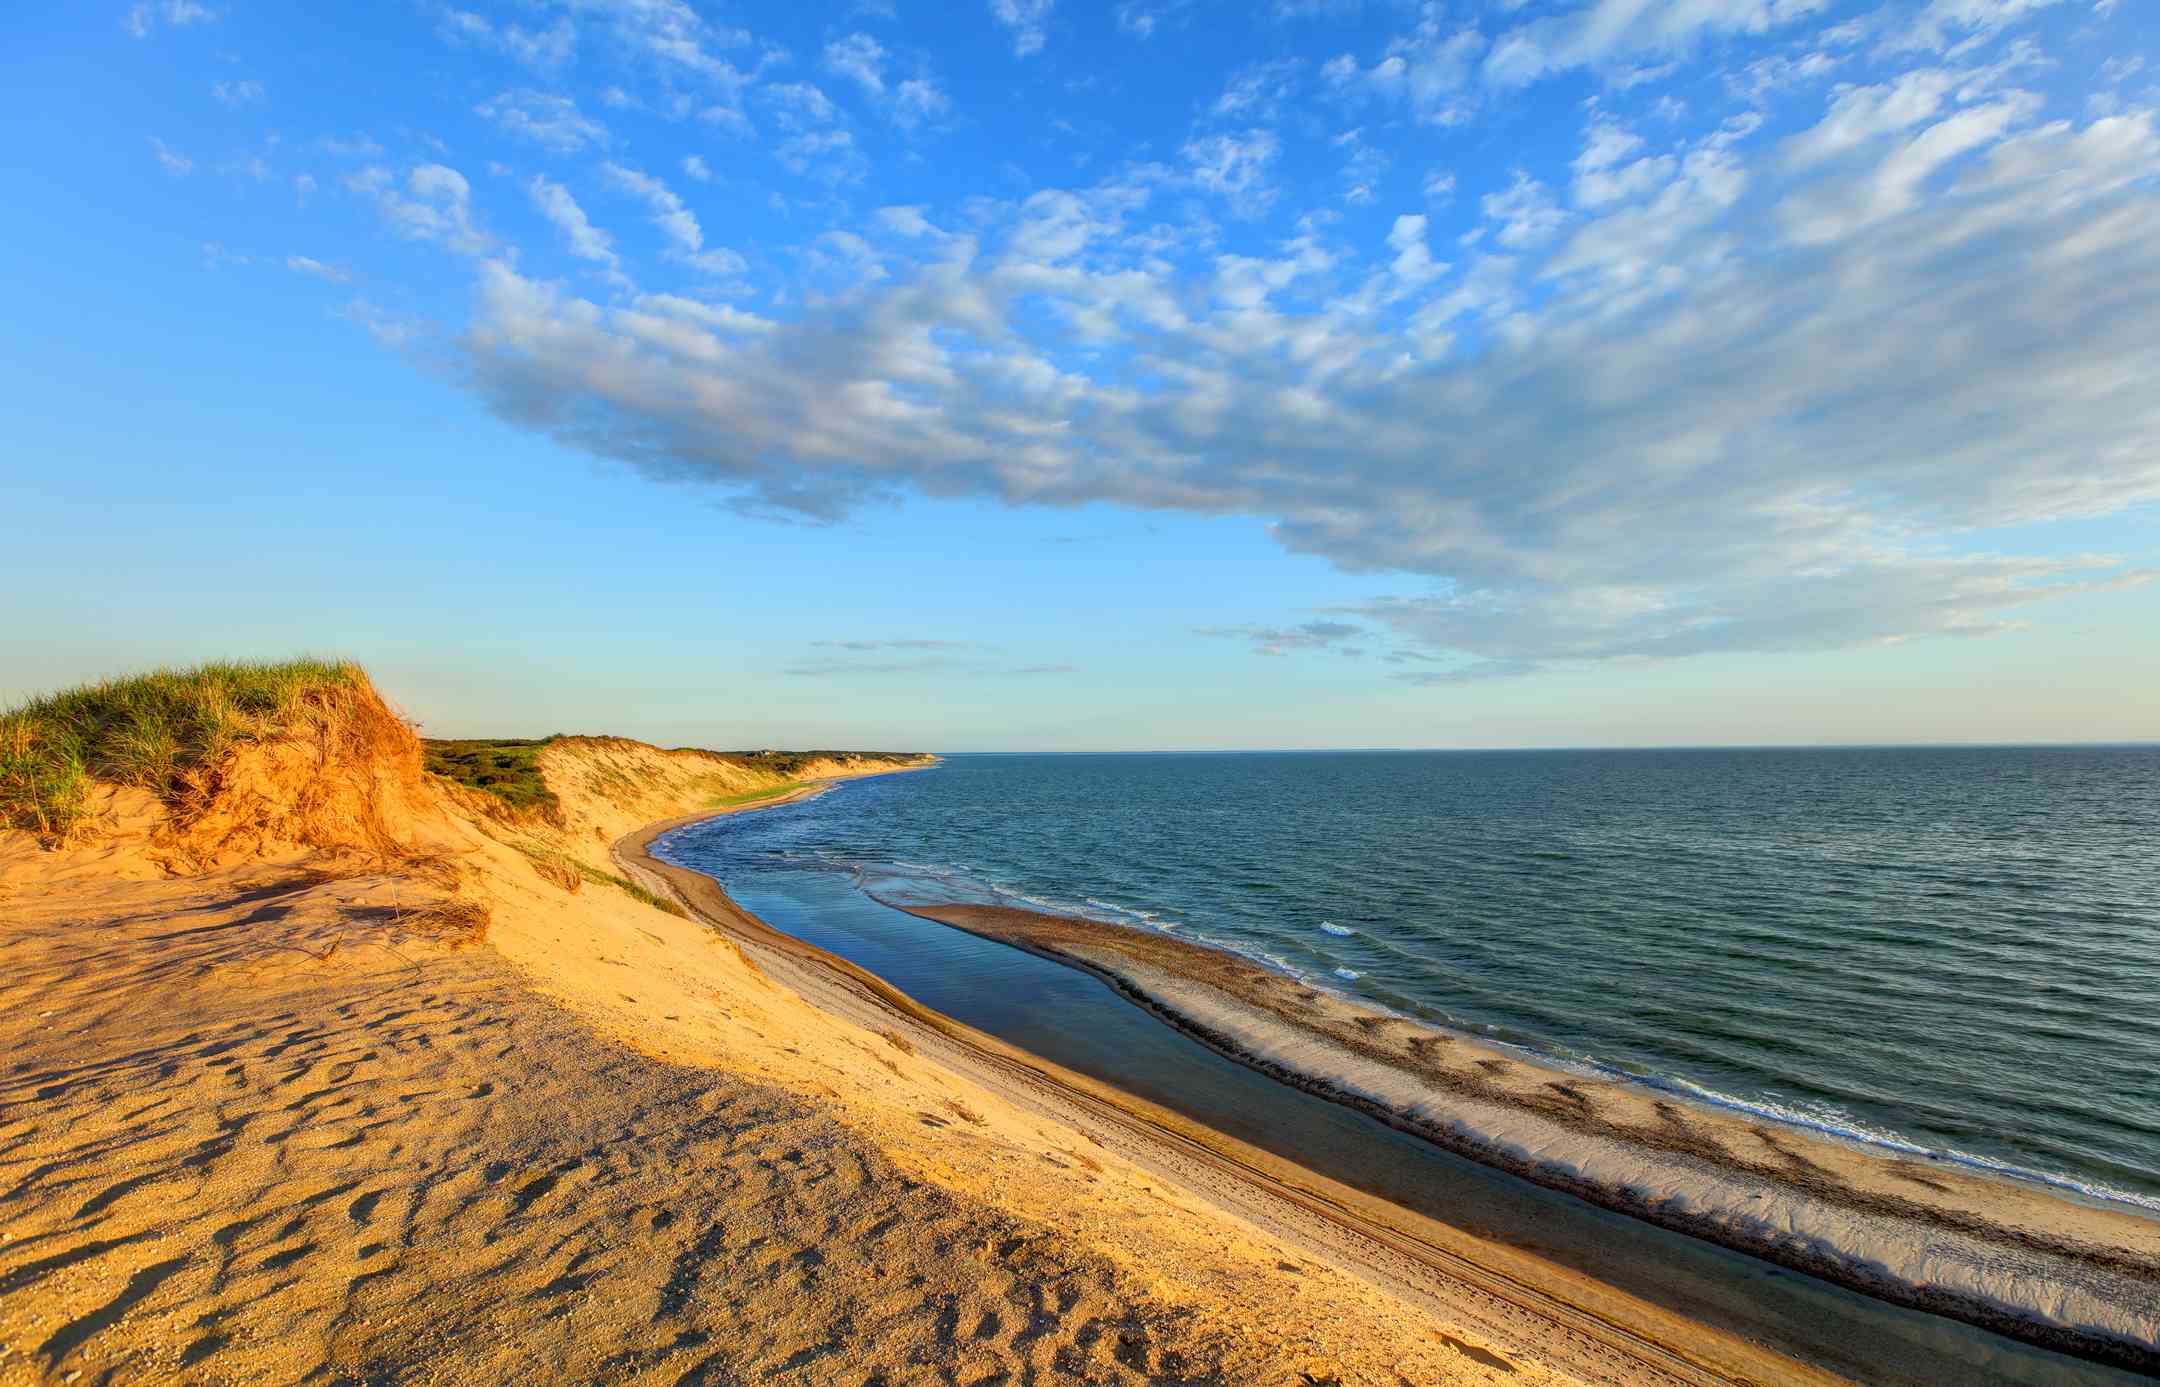 The Complete Guide to Cape Cod National Seashore